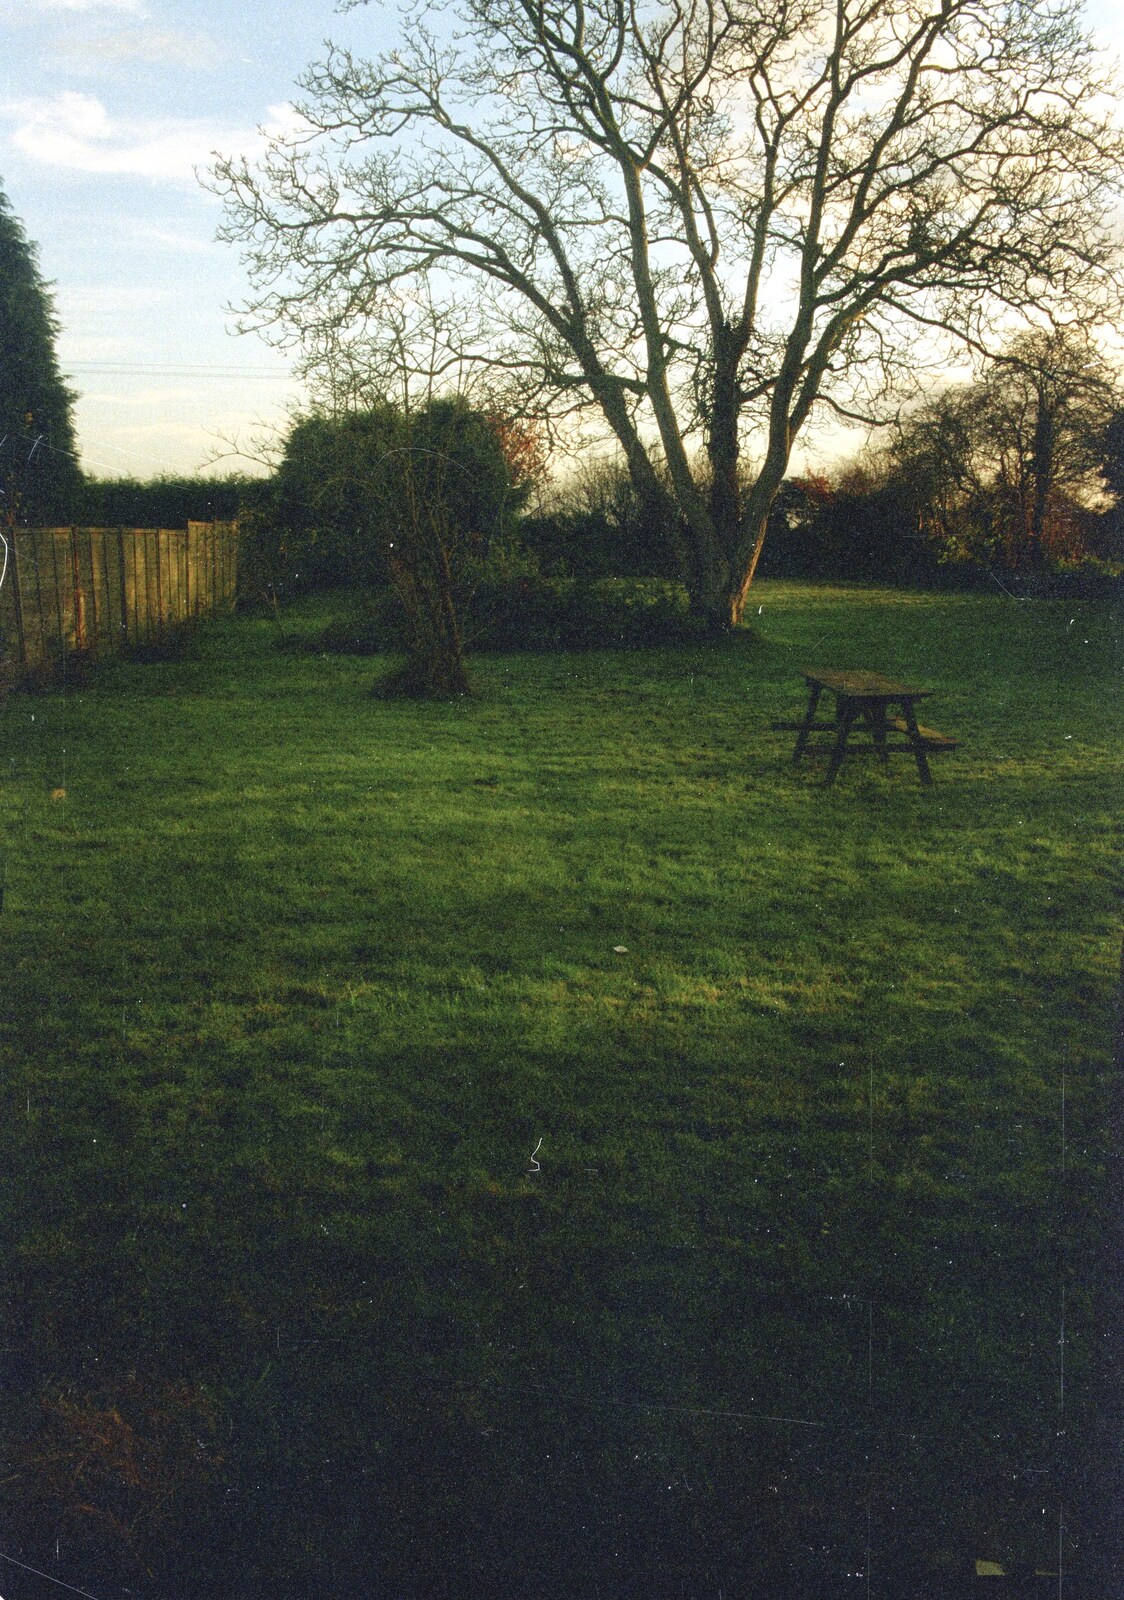 The back garden with its newish lawn from Paula's 3G Lab Wedding Reception, Huntingdon, Cambridgeshire - 4th September 2000